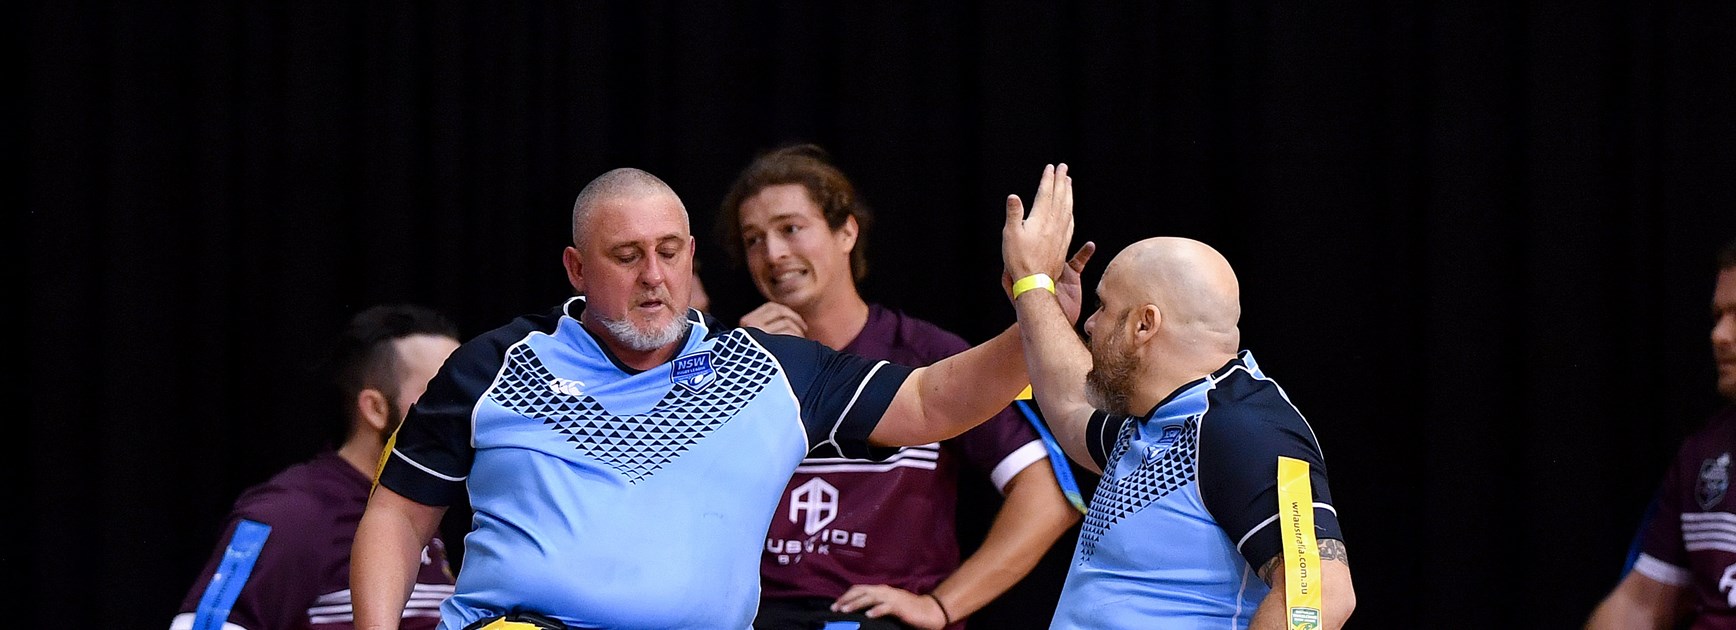 NSW claim victory in Wheelchair State of Origin